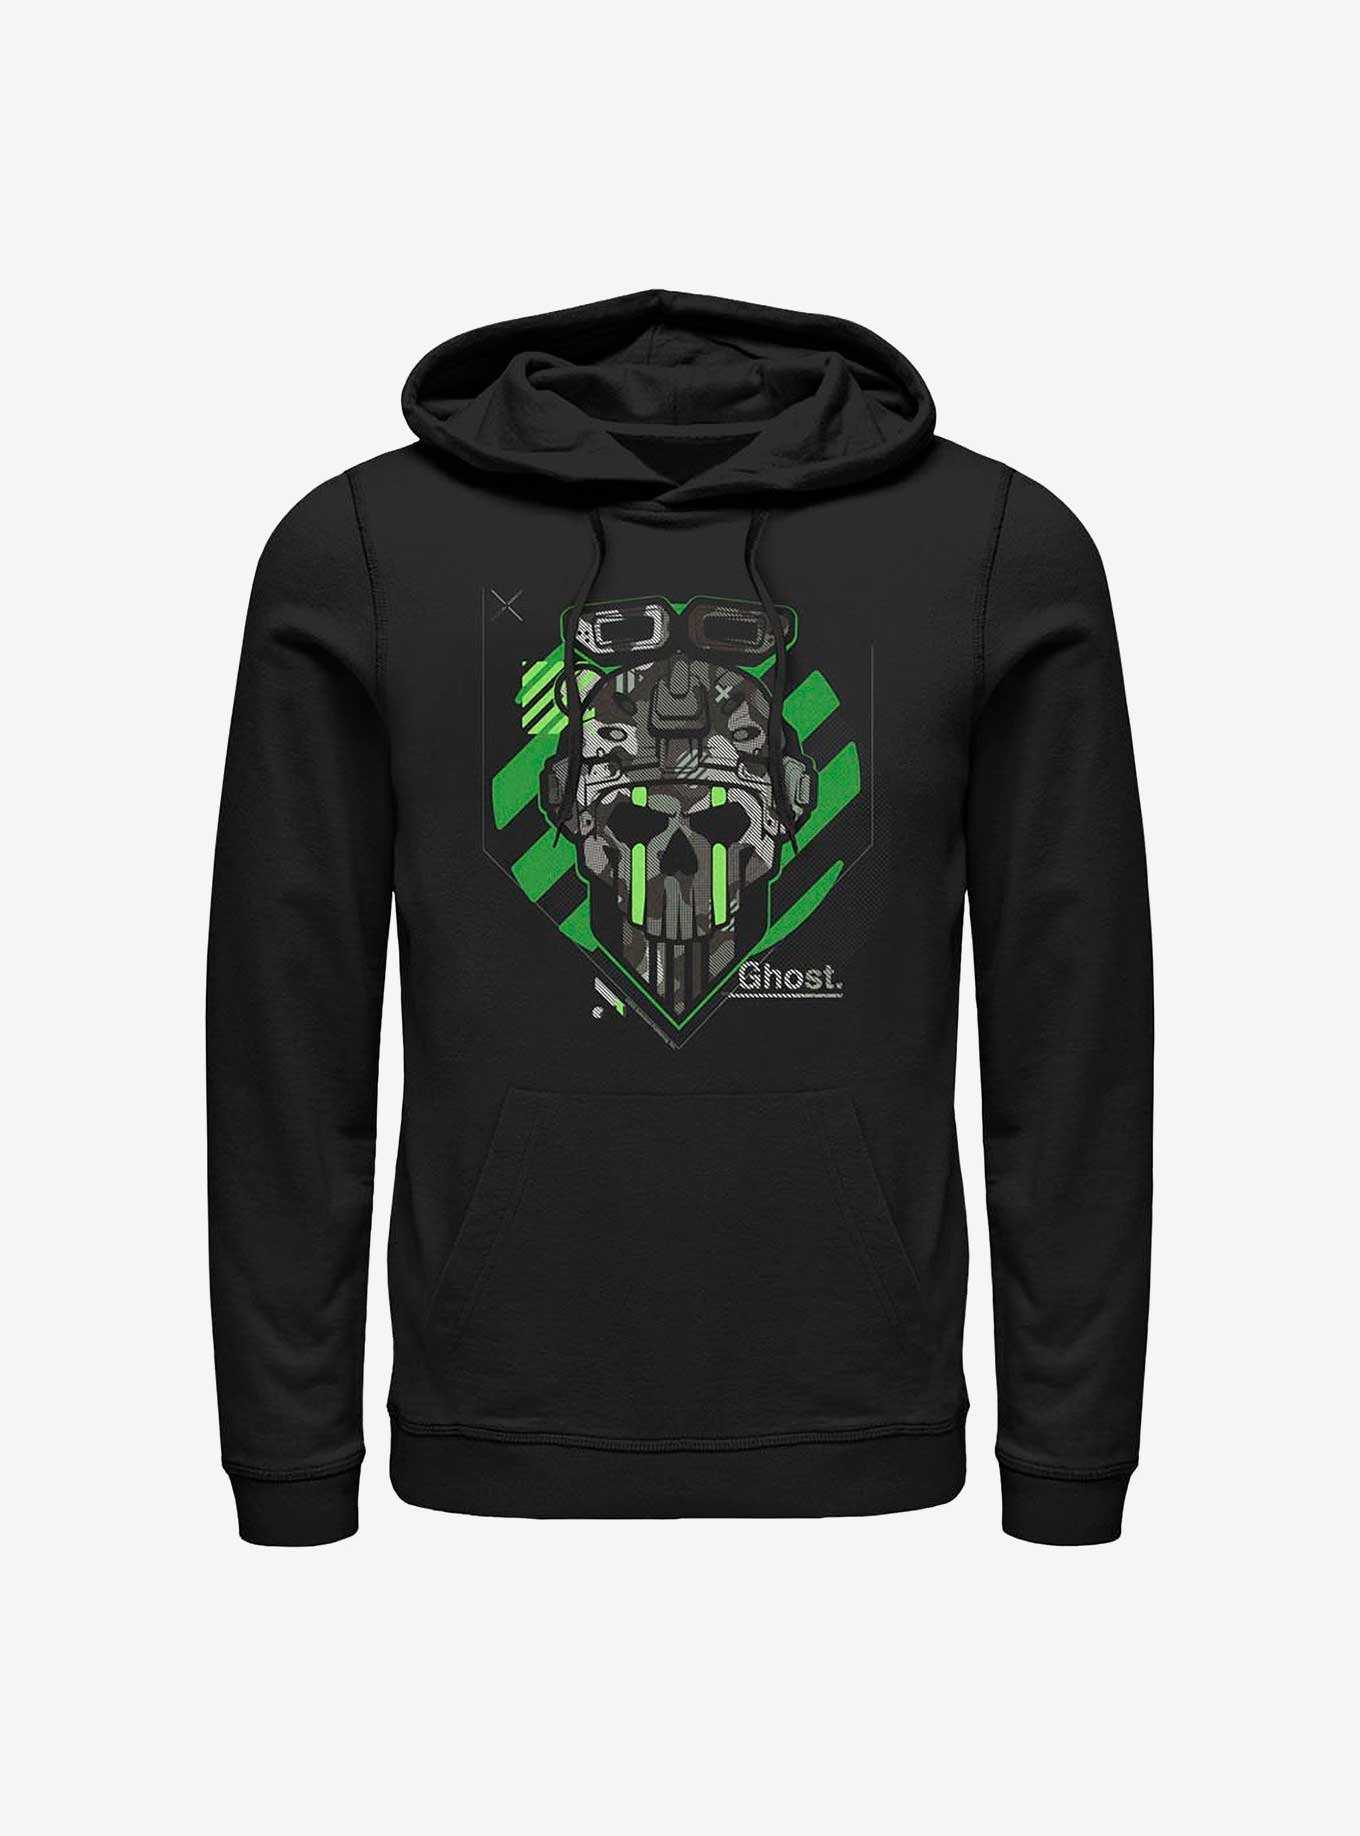 Call Of Duty Camo Ghost Hoodie, , hi-res